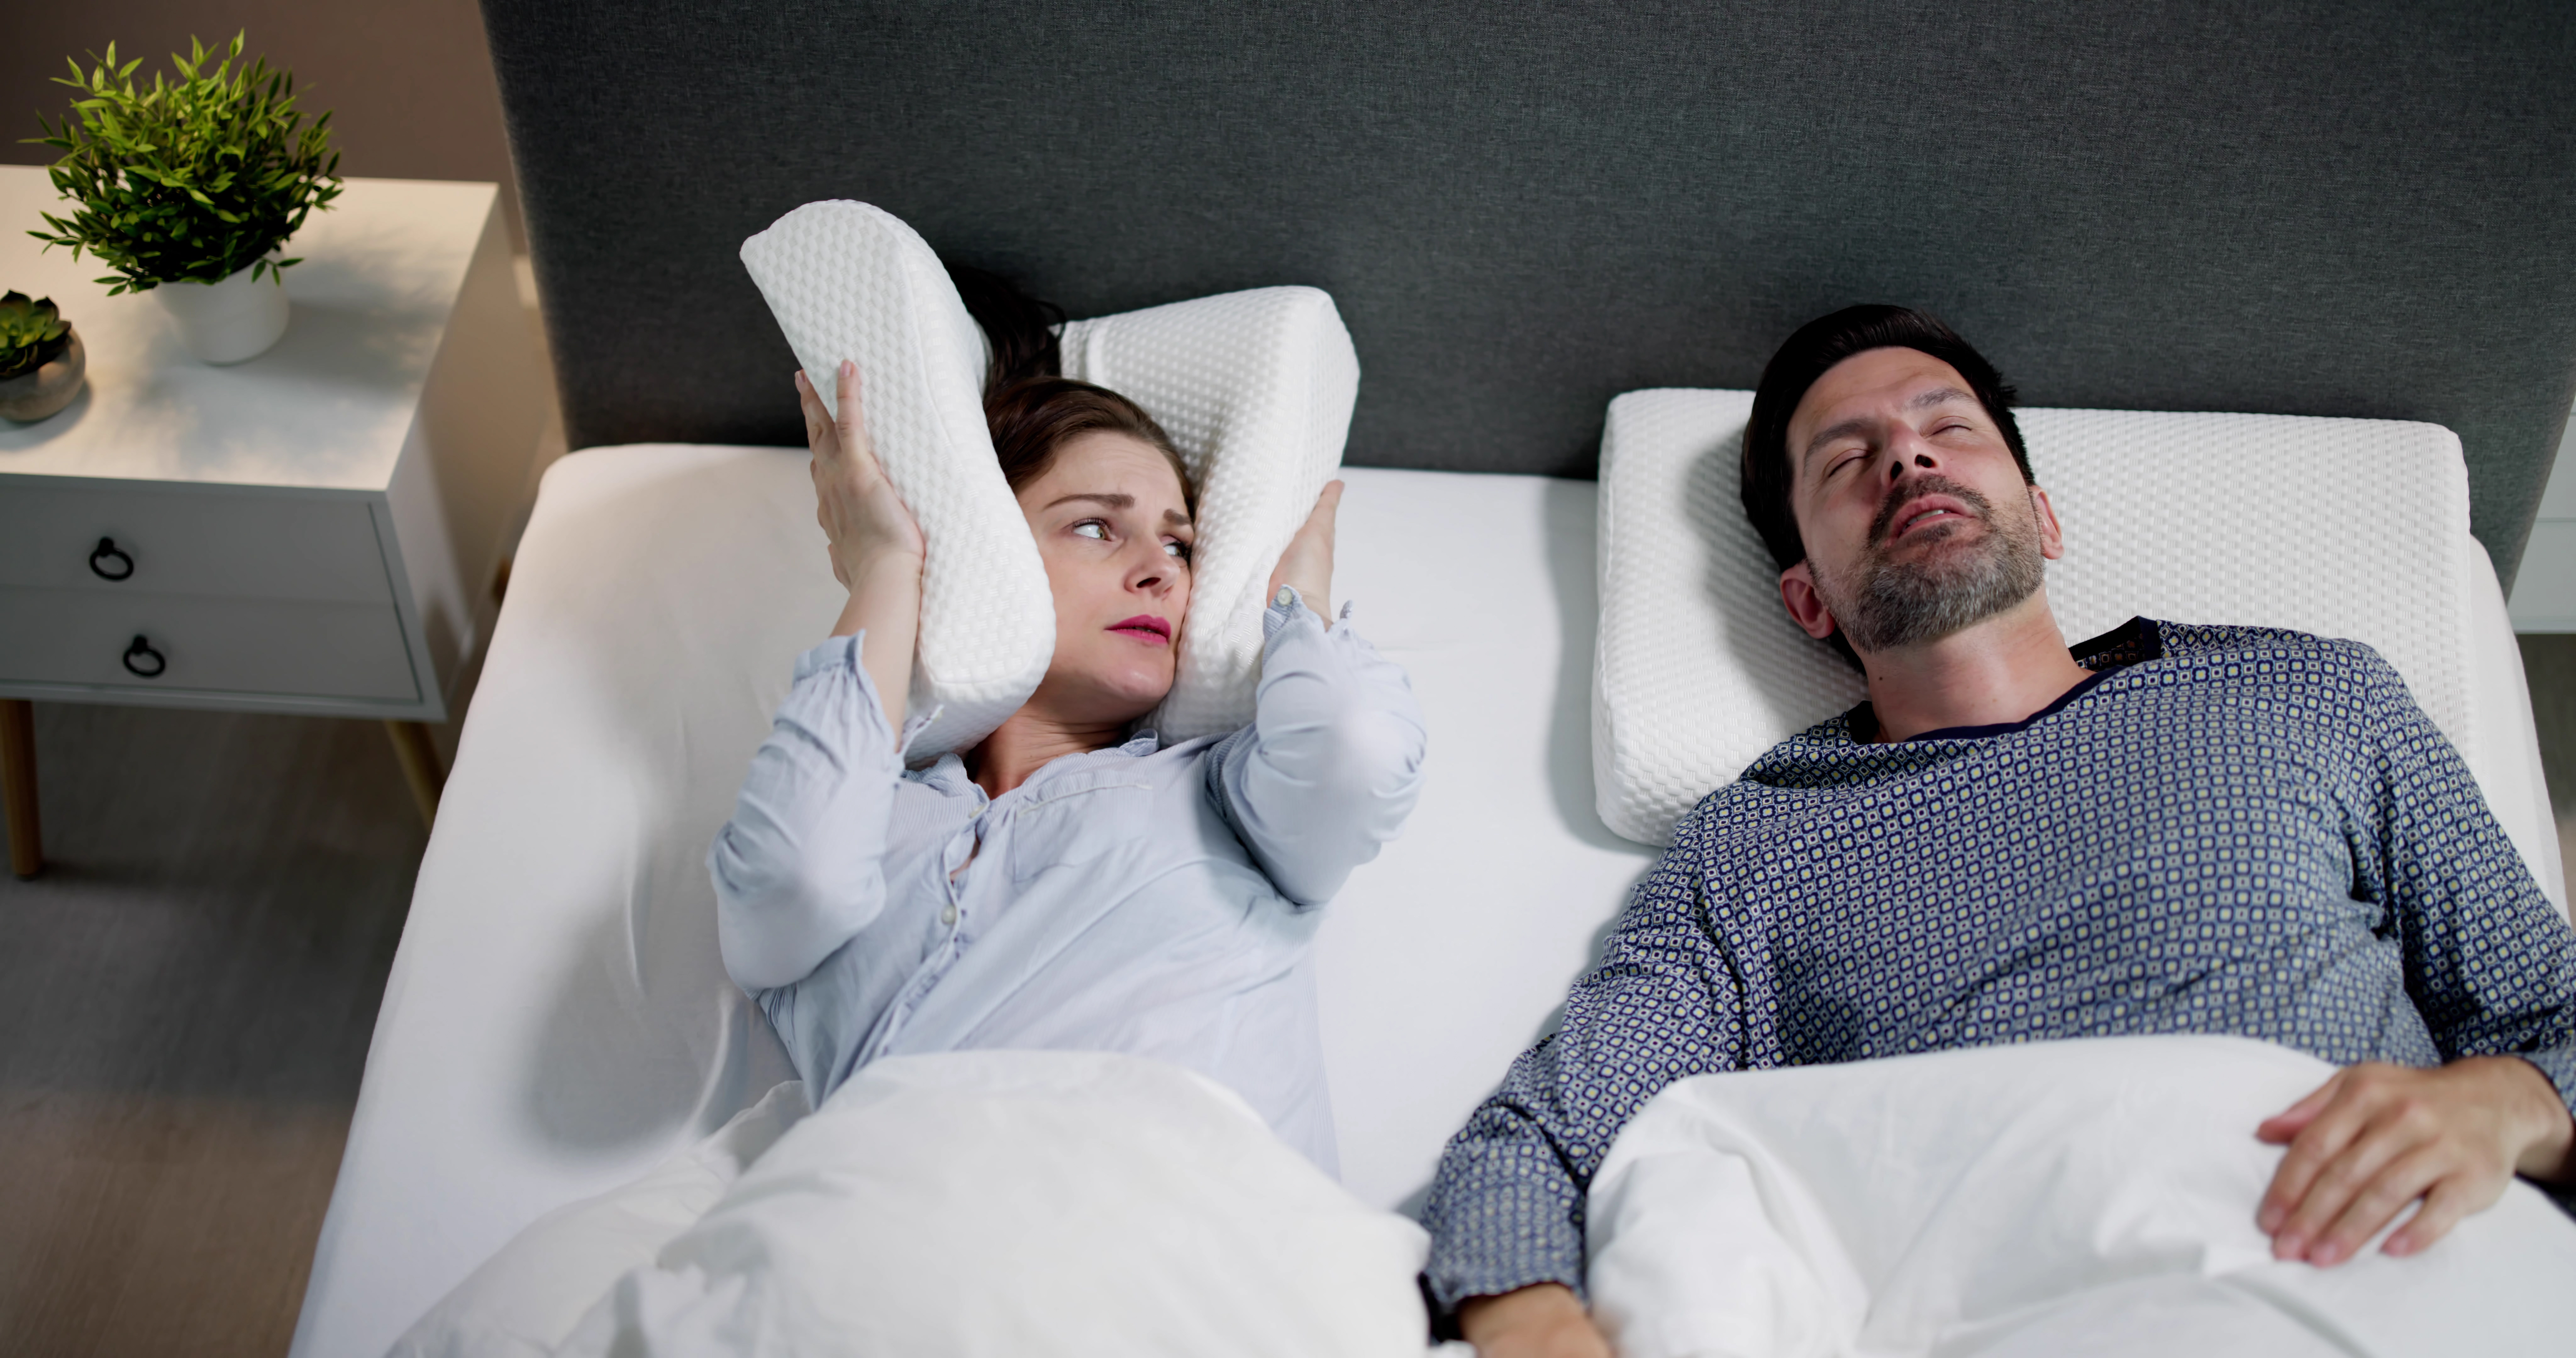 Record your partner snoring and listen to it every day for two weeks to help your brain take it on as a regular sound